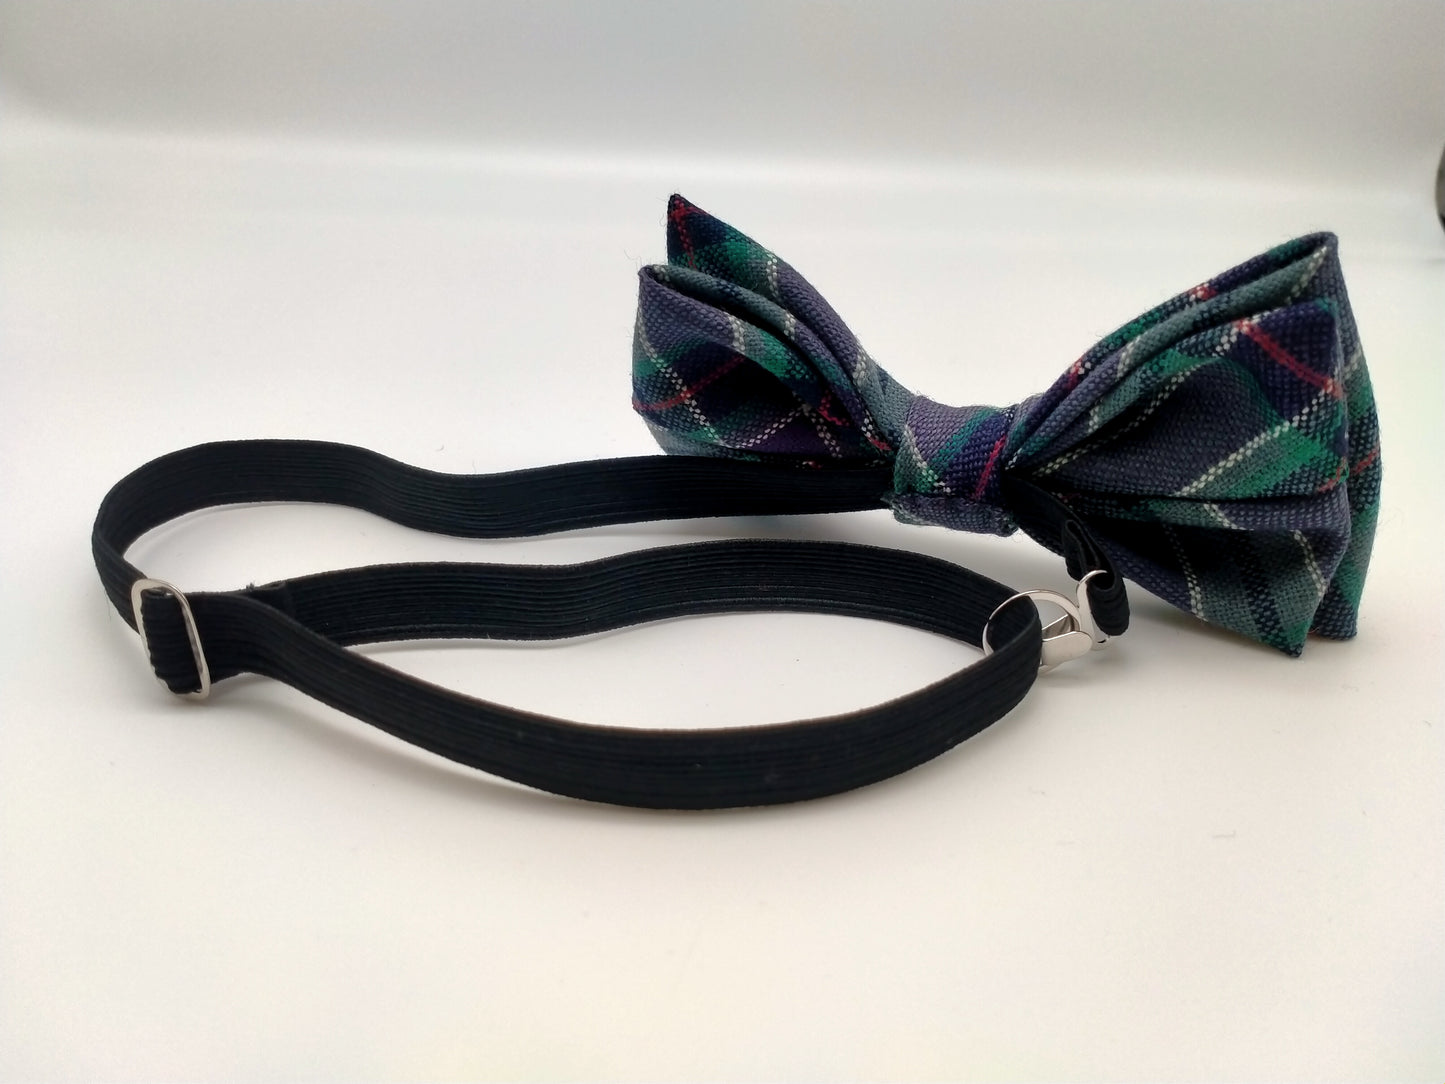 The back of the bow-tie with a black elastic neckband.